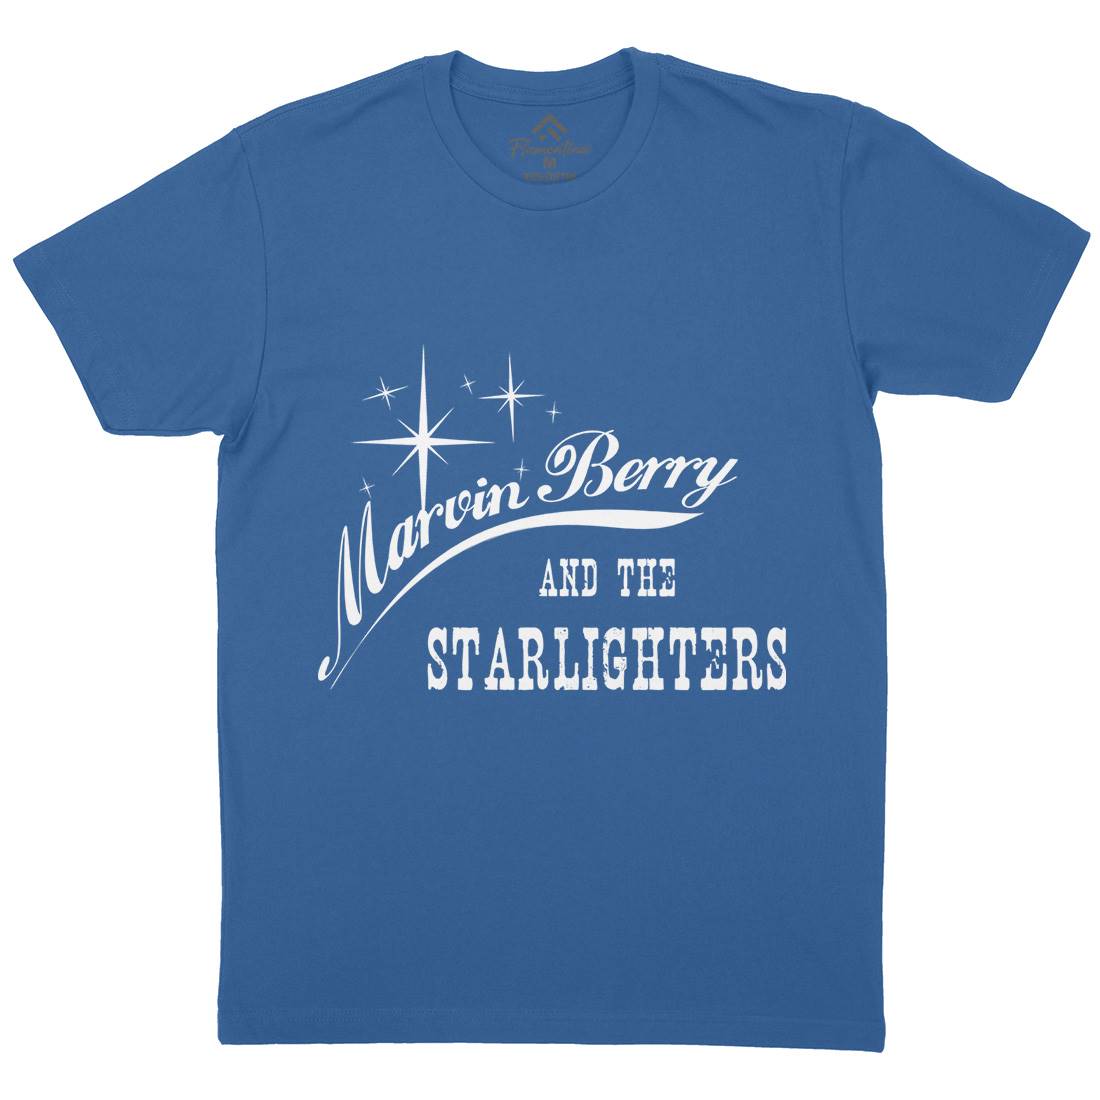 Marvin Berry And The Starlighters Mens Crew Neck T-Shirt Music D152